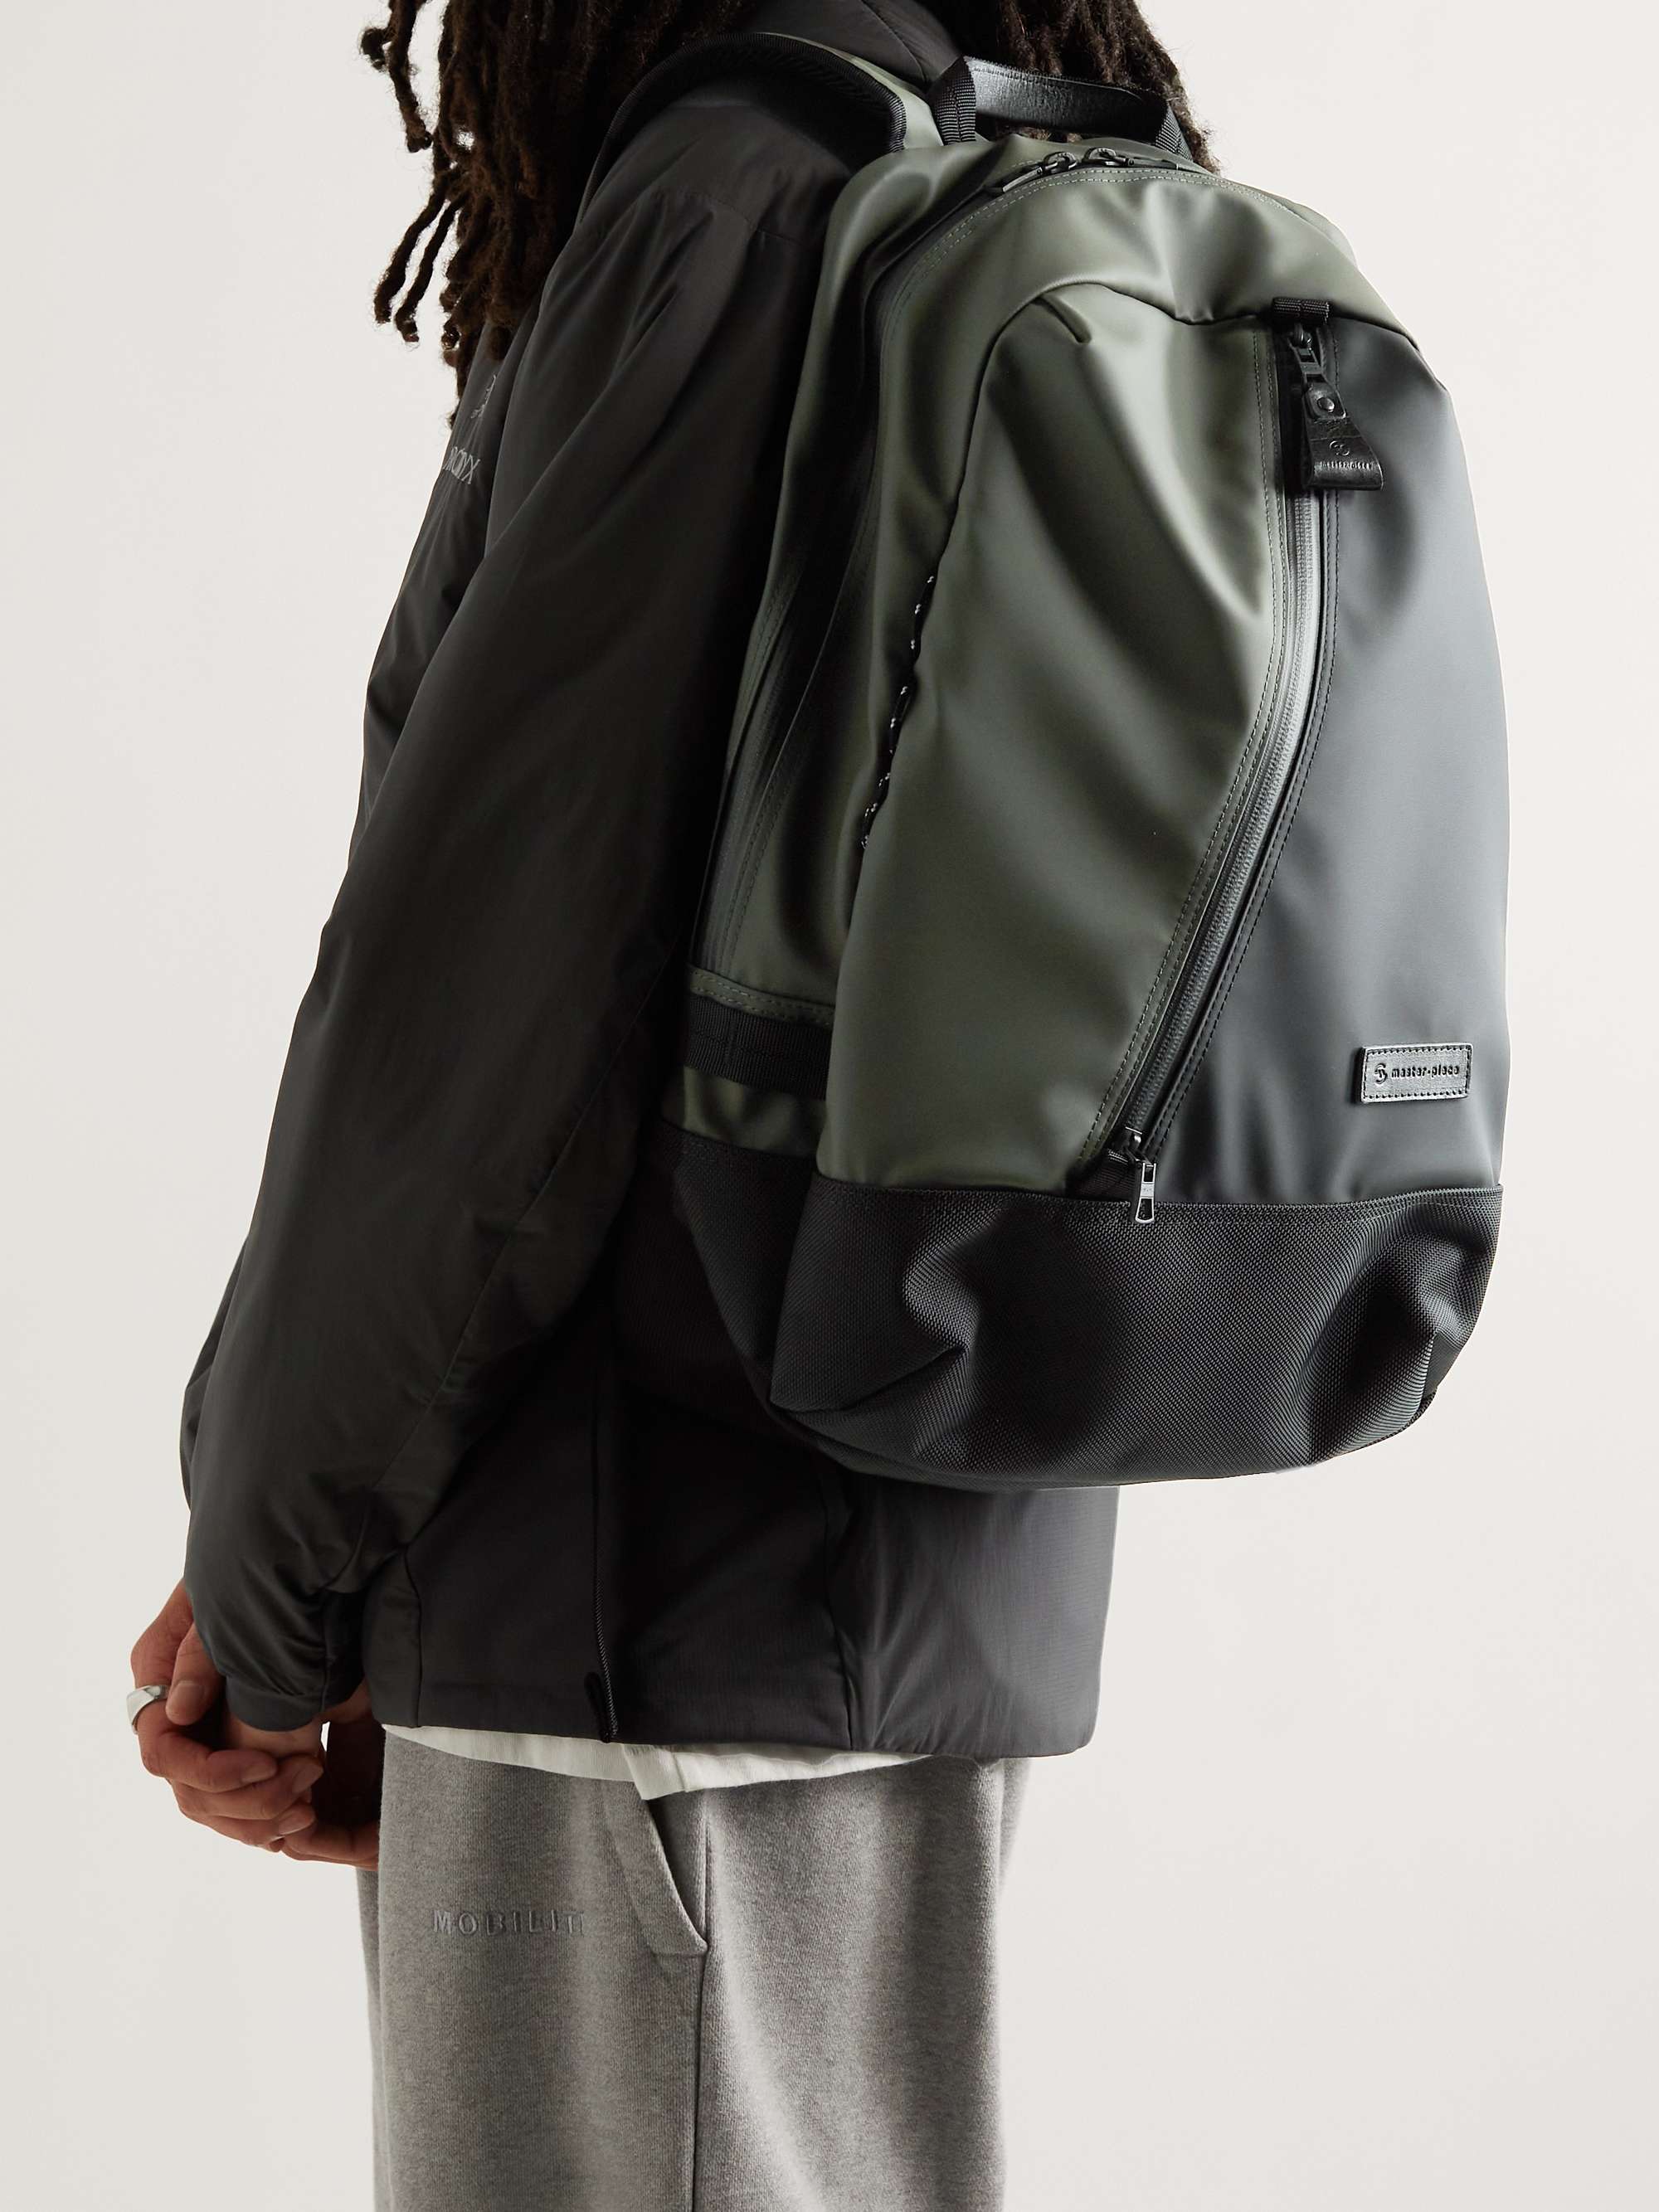 MASTER-PIECE Slick Large Canvas and Leather-Trimmed CORDURA Backpack